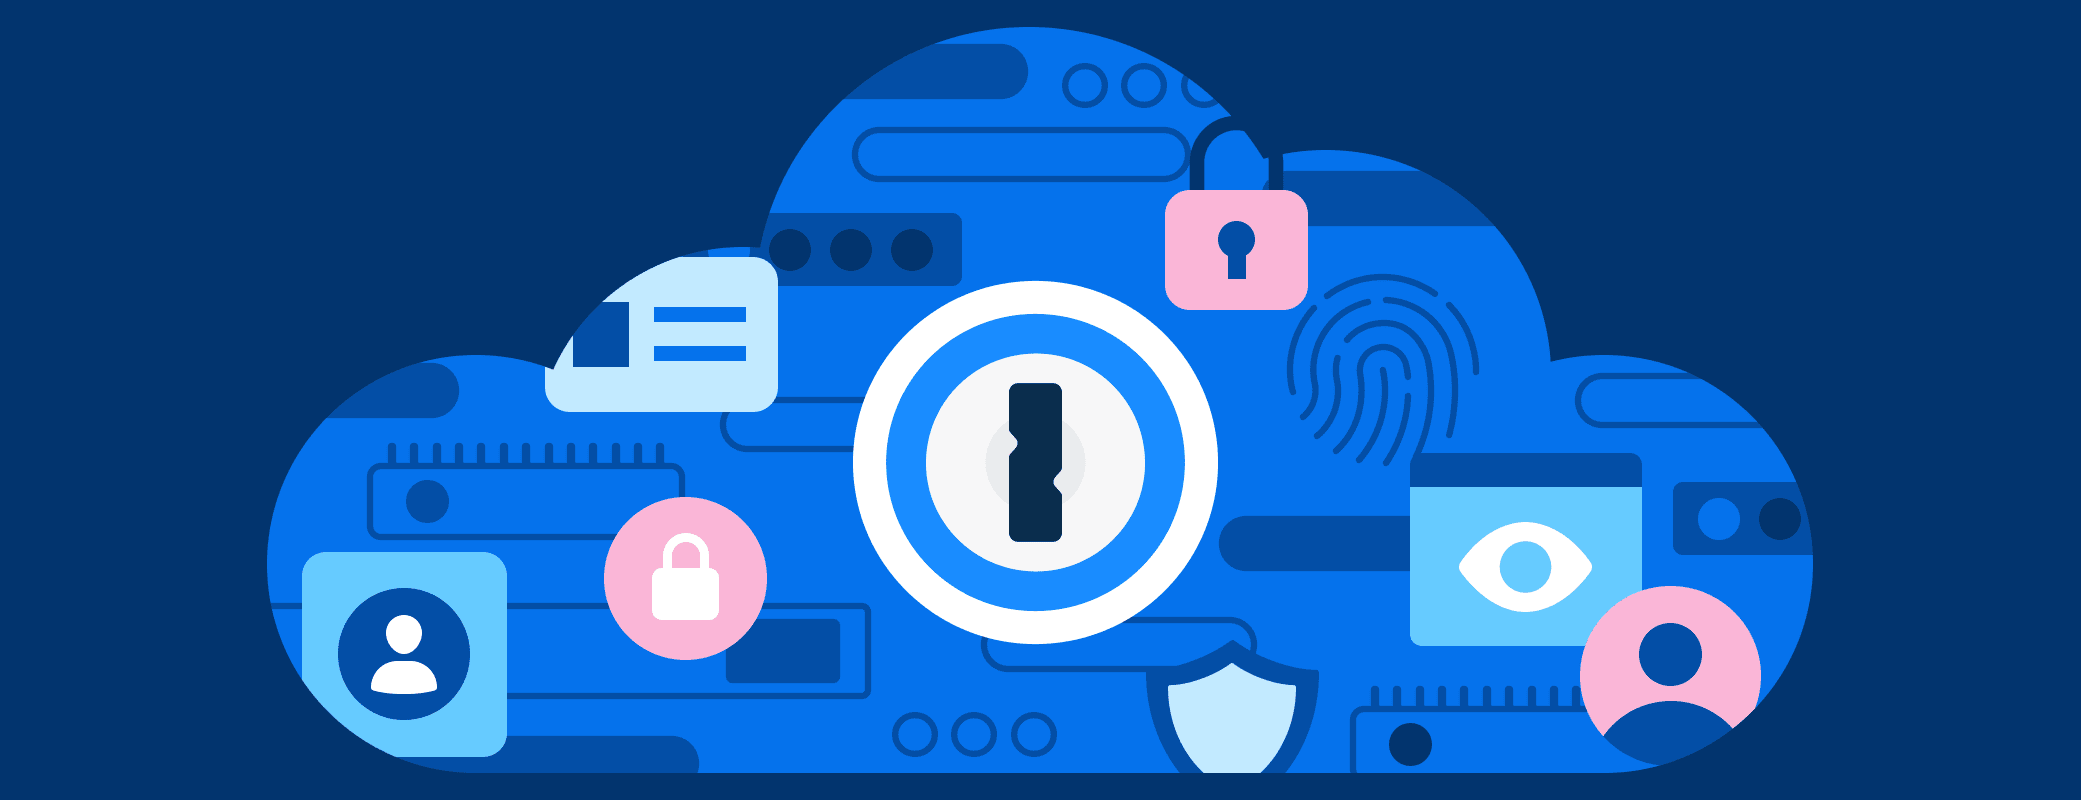 1Password named one of Forbes Cloud 100